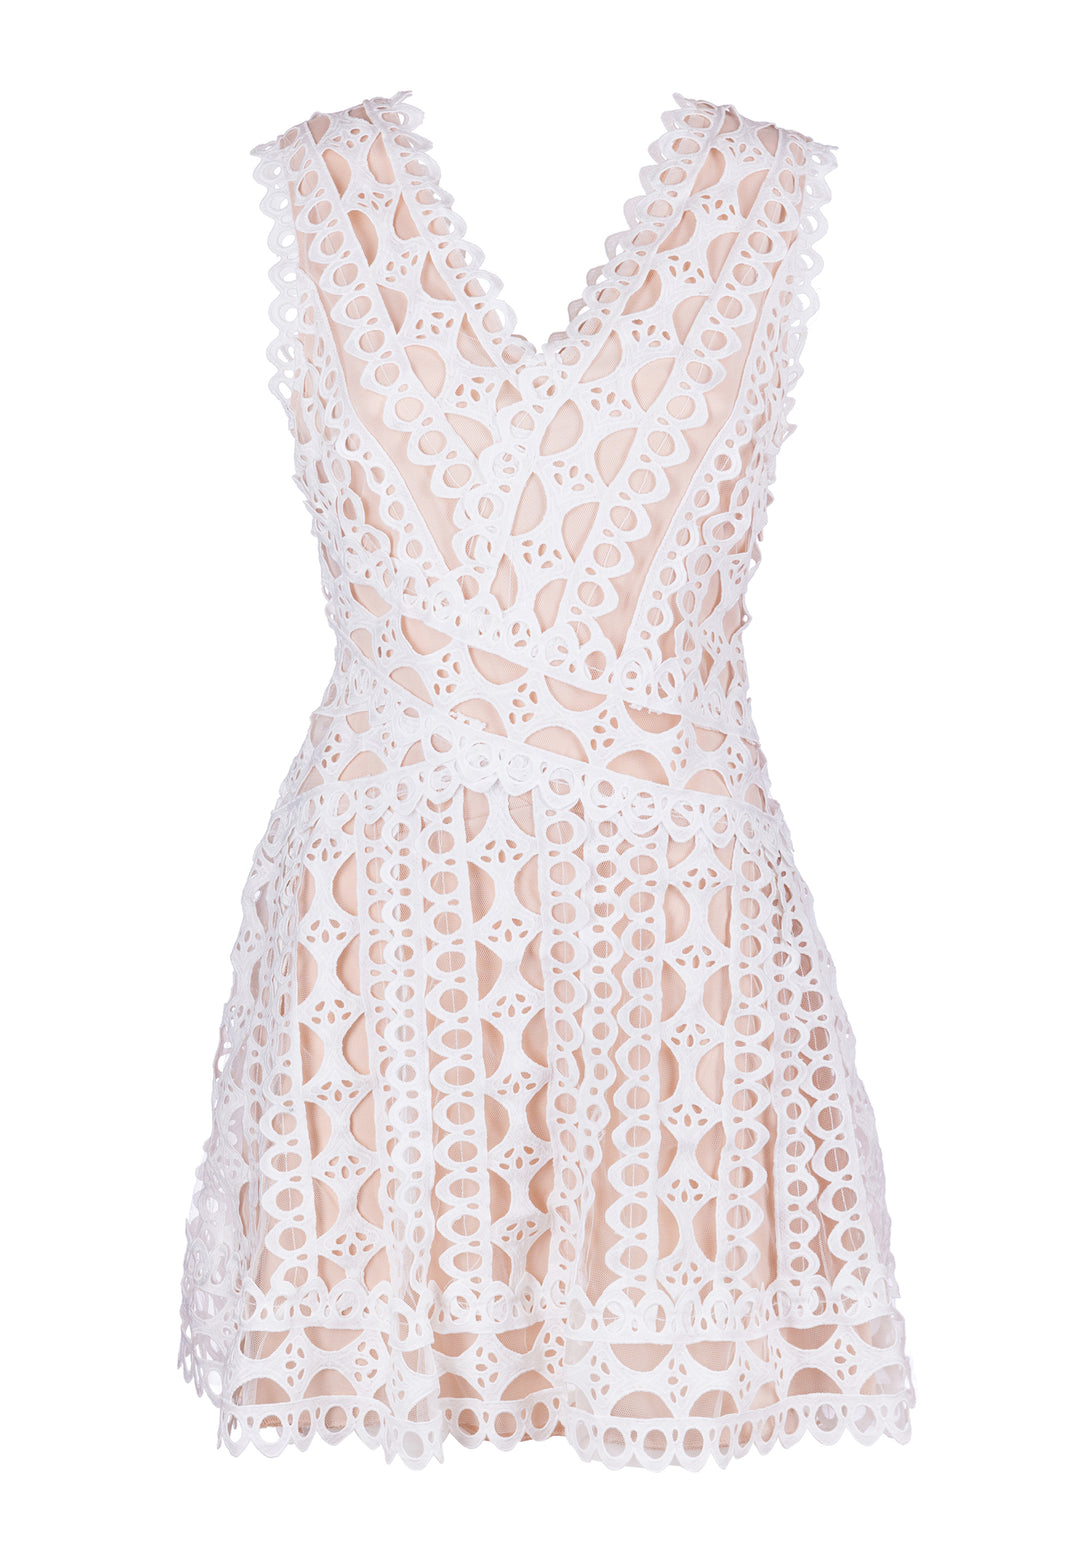 Mini sleeveless dress slim fit made in lace